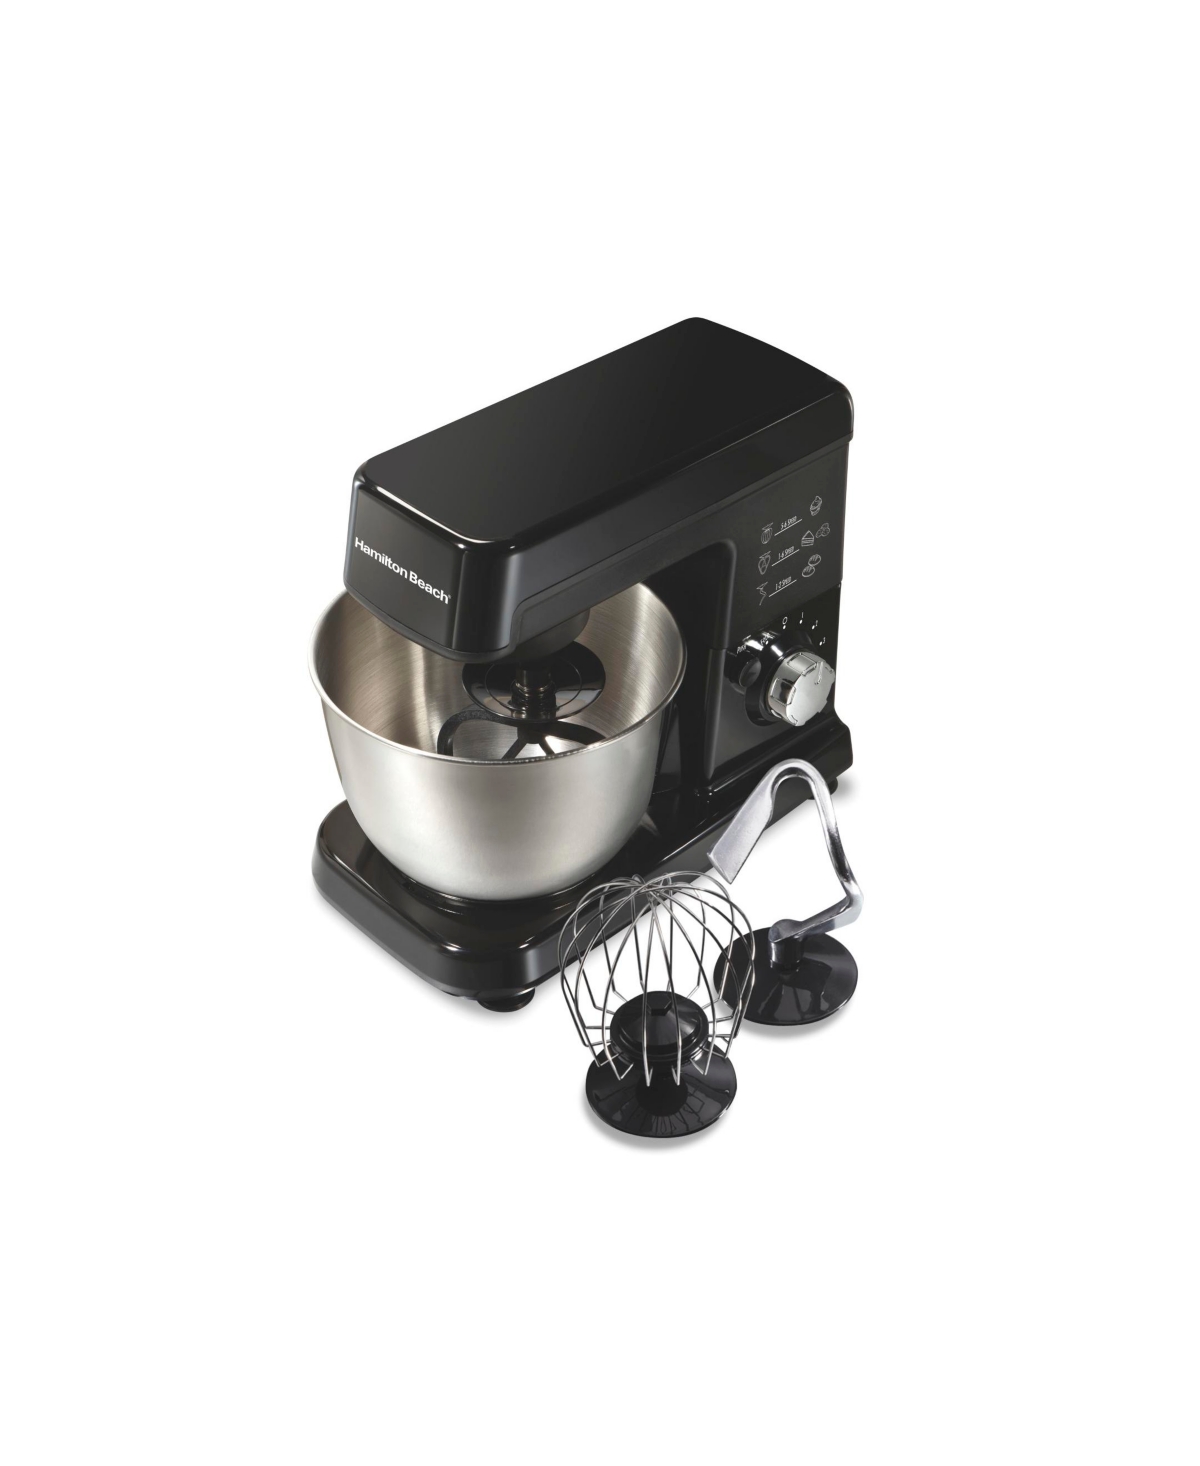 Hamilton Beach Stand Mixer With 6 Speeds Fold Setting In Black